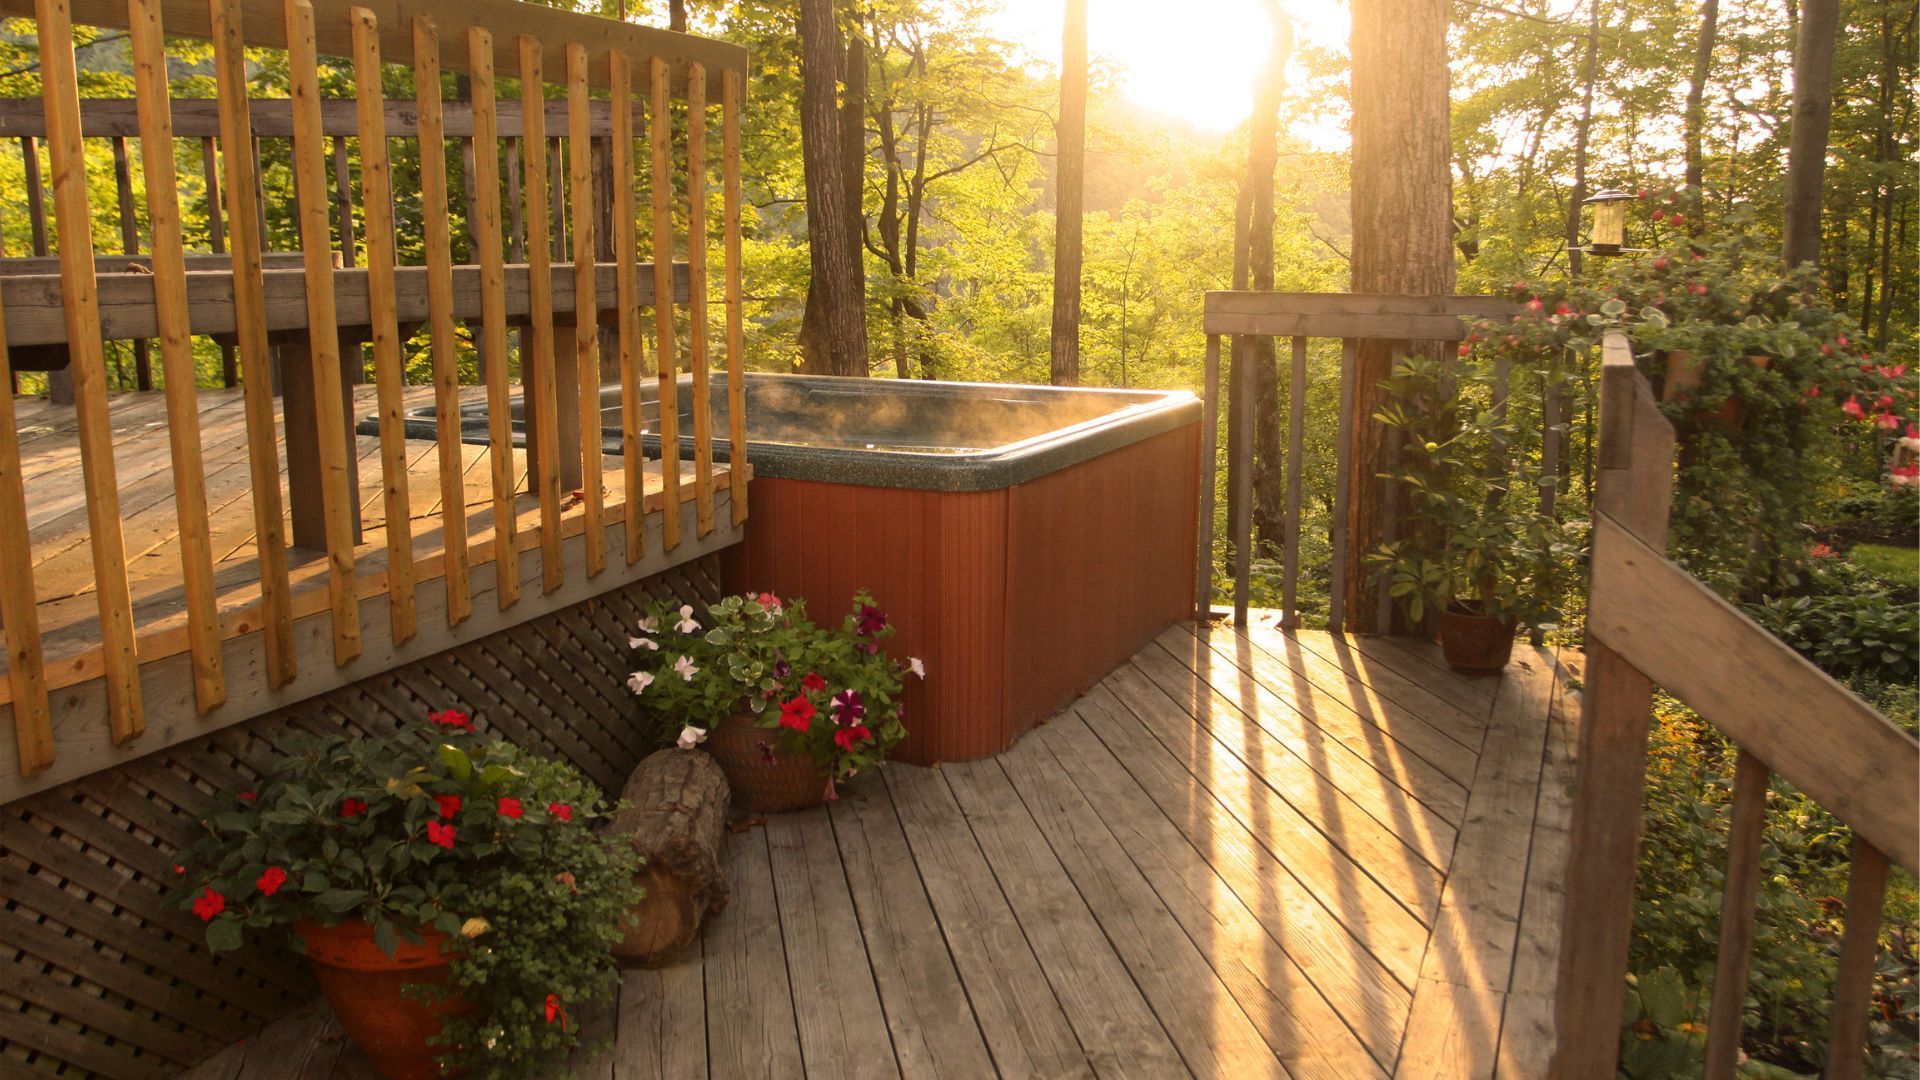 Warm sunset over a spacious deck in St. Paul, featuring a hot tub and lush greenery.